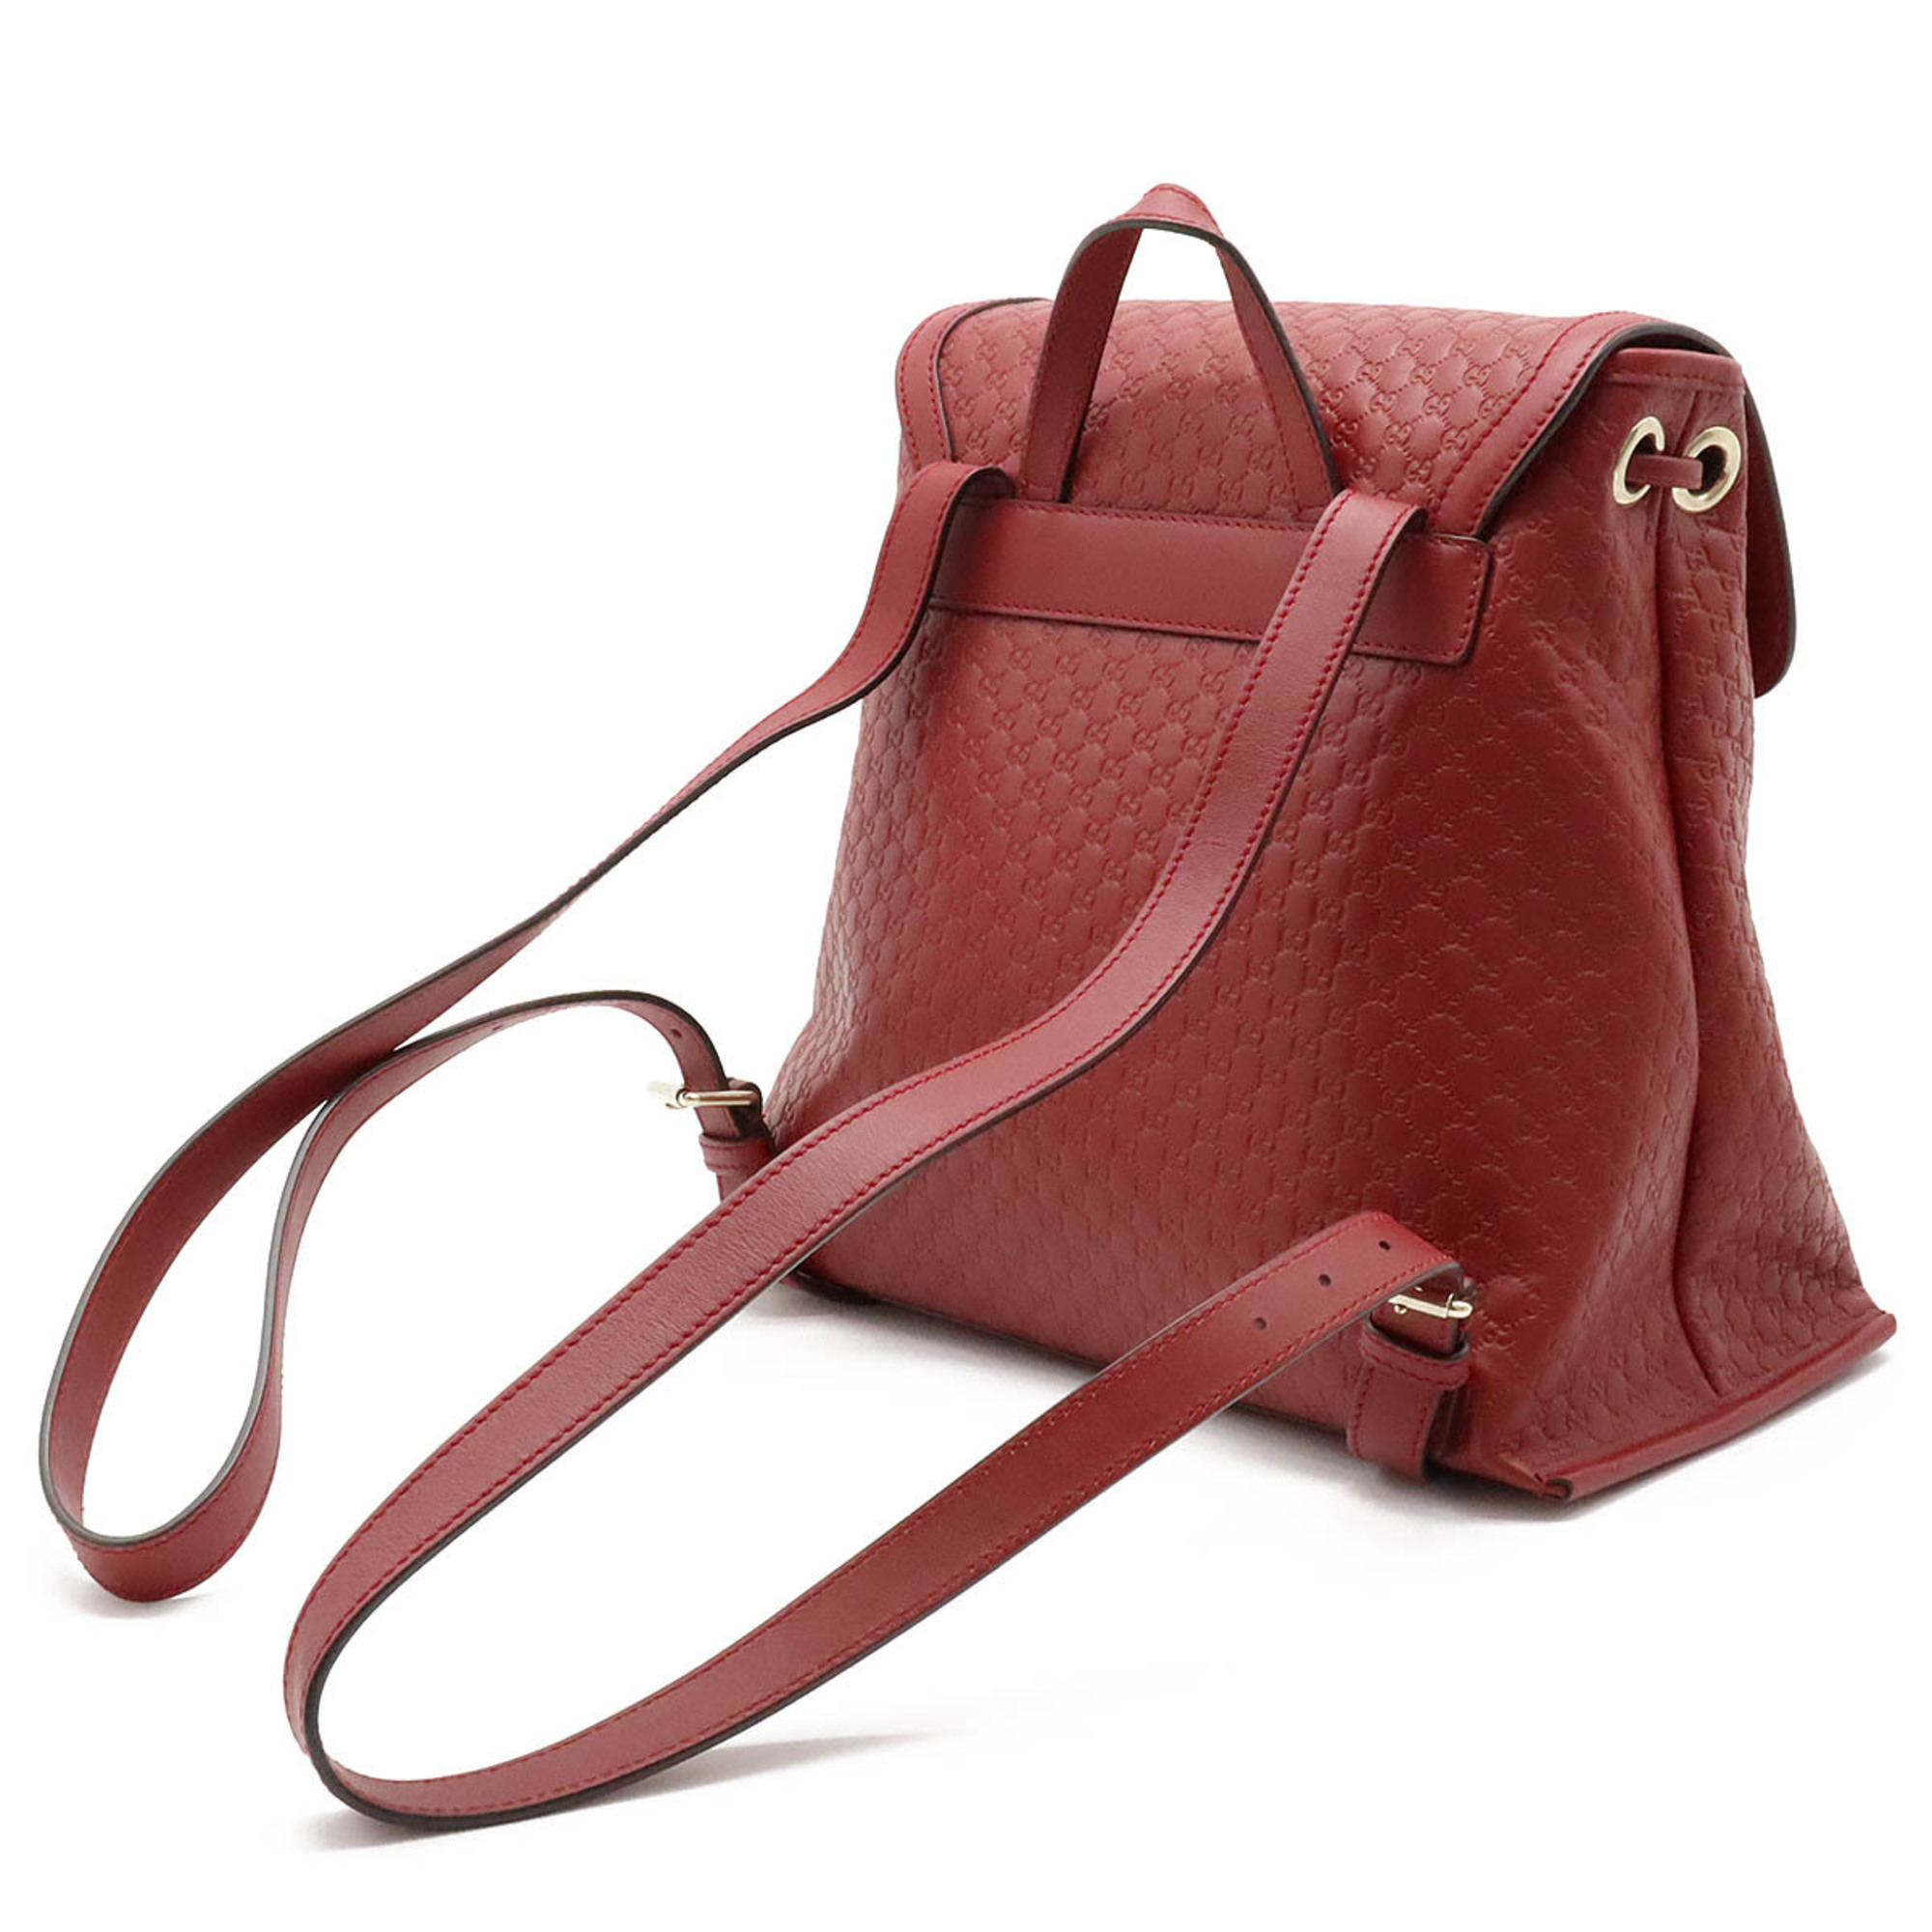 GUCCI Gucci Micro Guccisima Backpack Rucksack Leather Bordeaux Red 607993